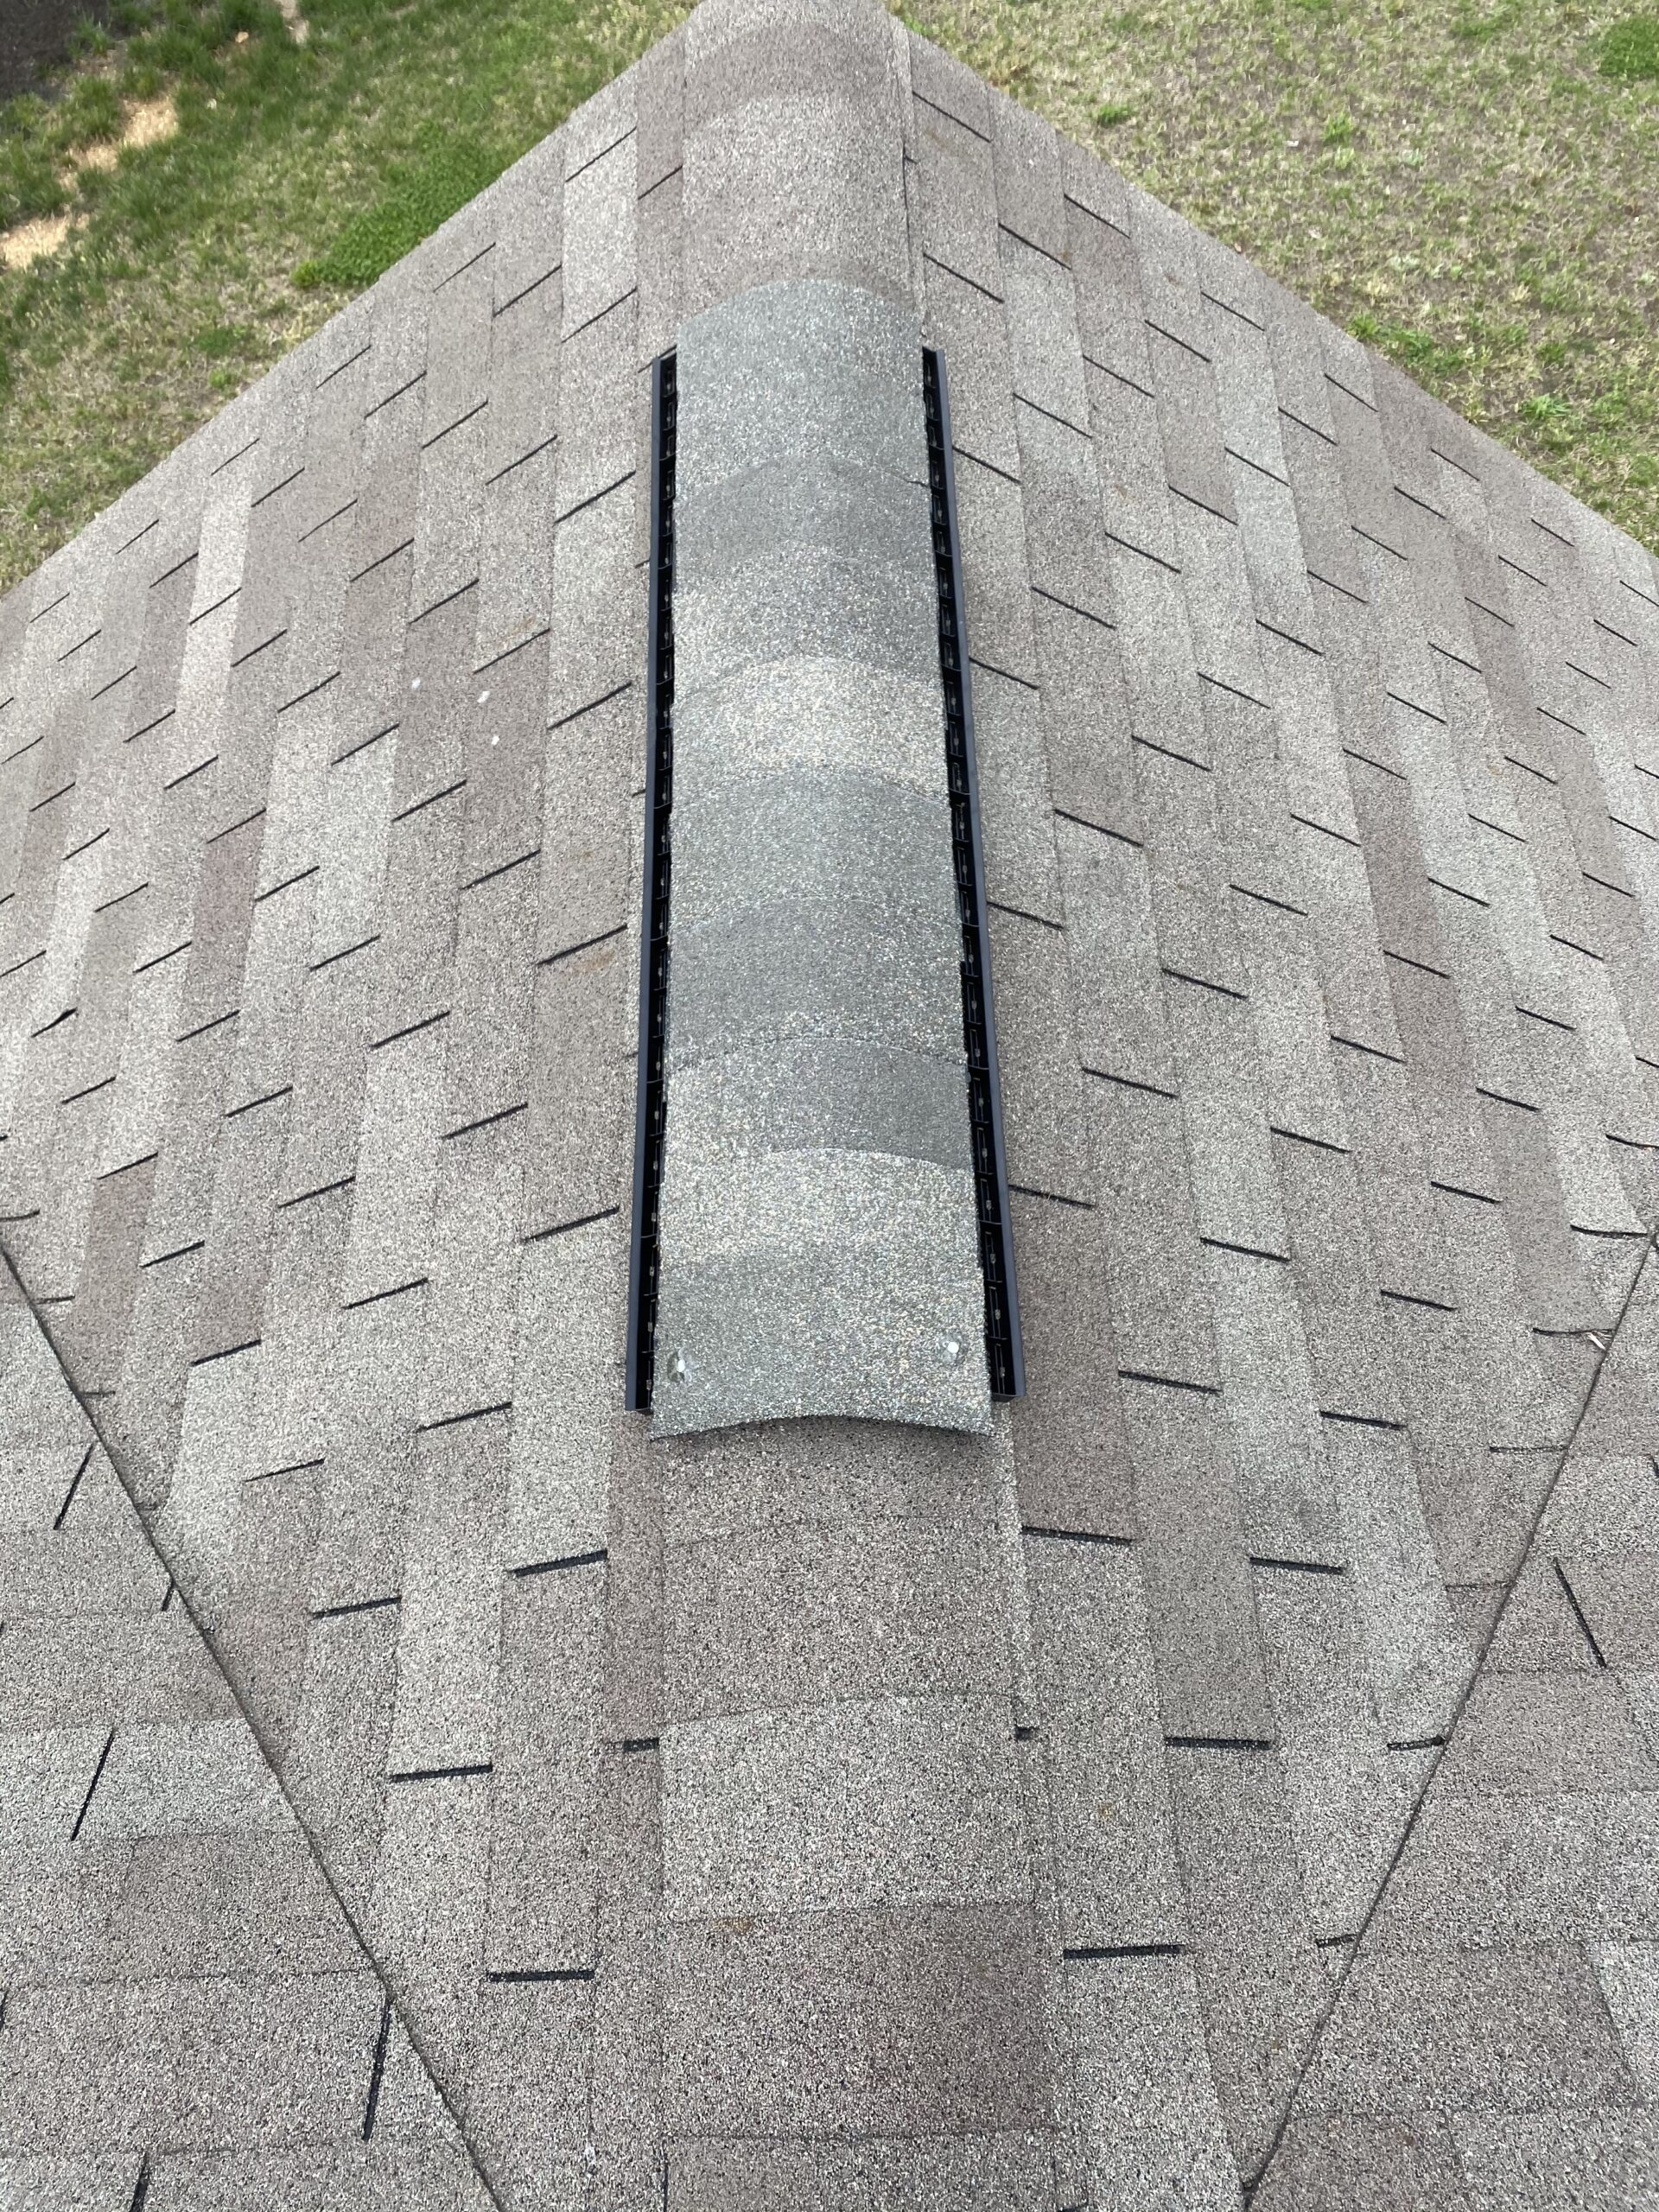 This is a picture of a new ridge vent with ridge cap shingles